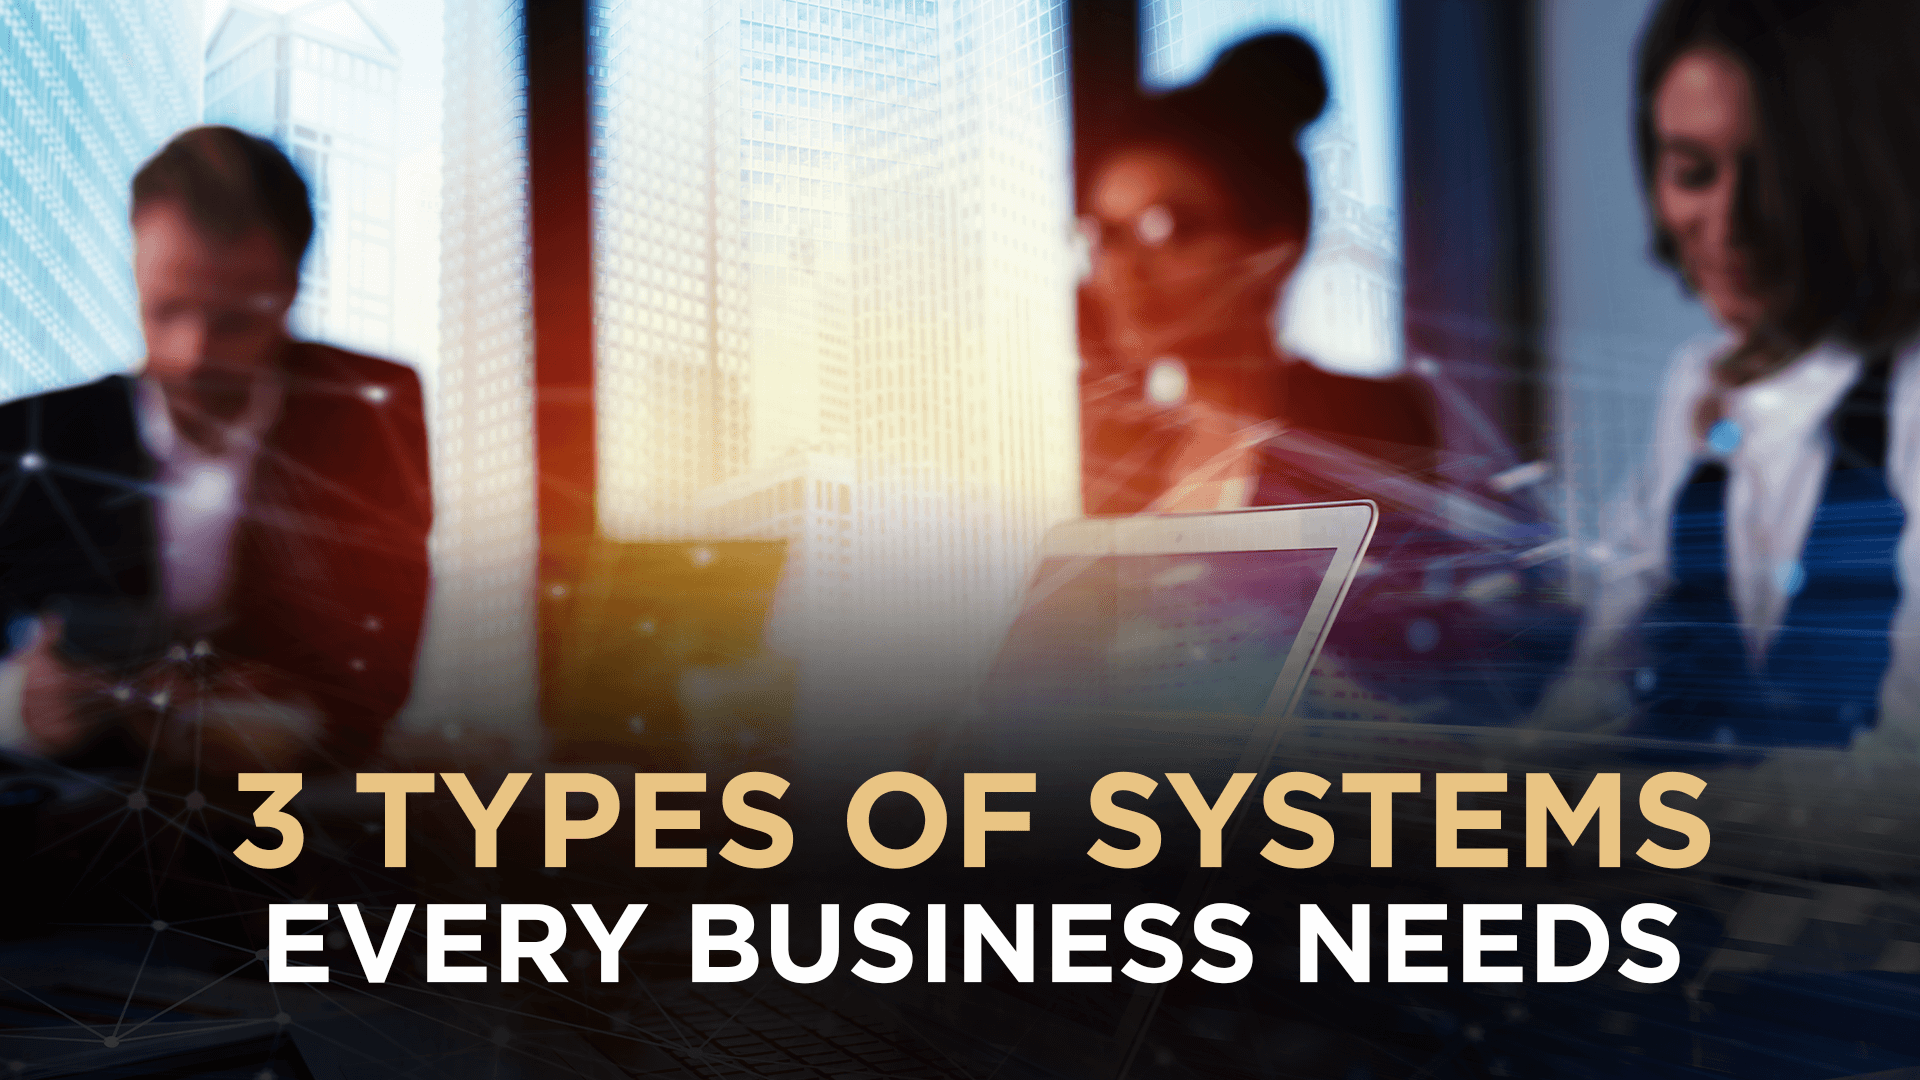 3 Types of Systems